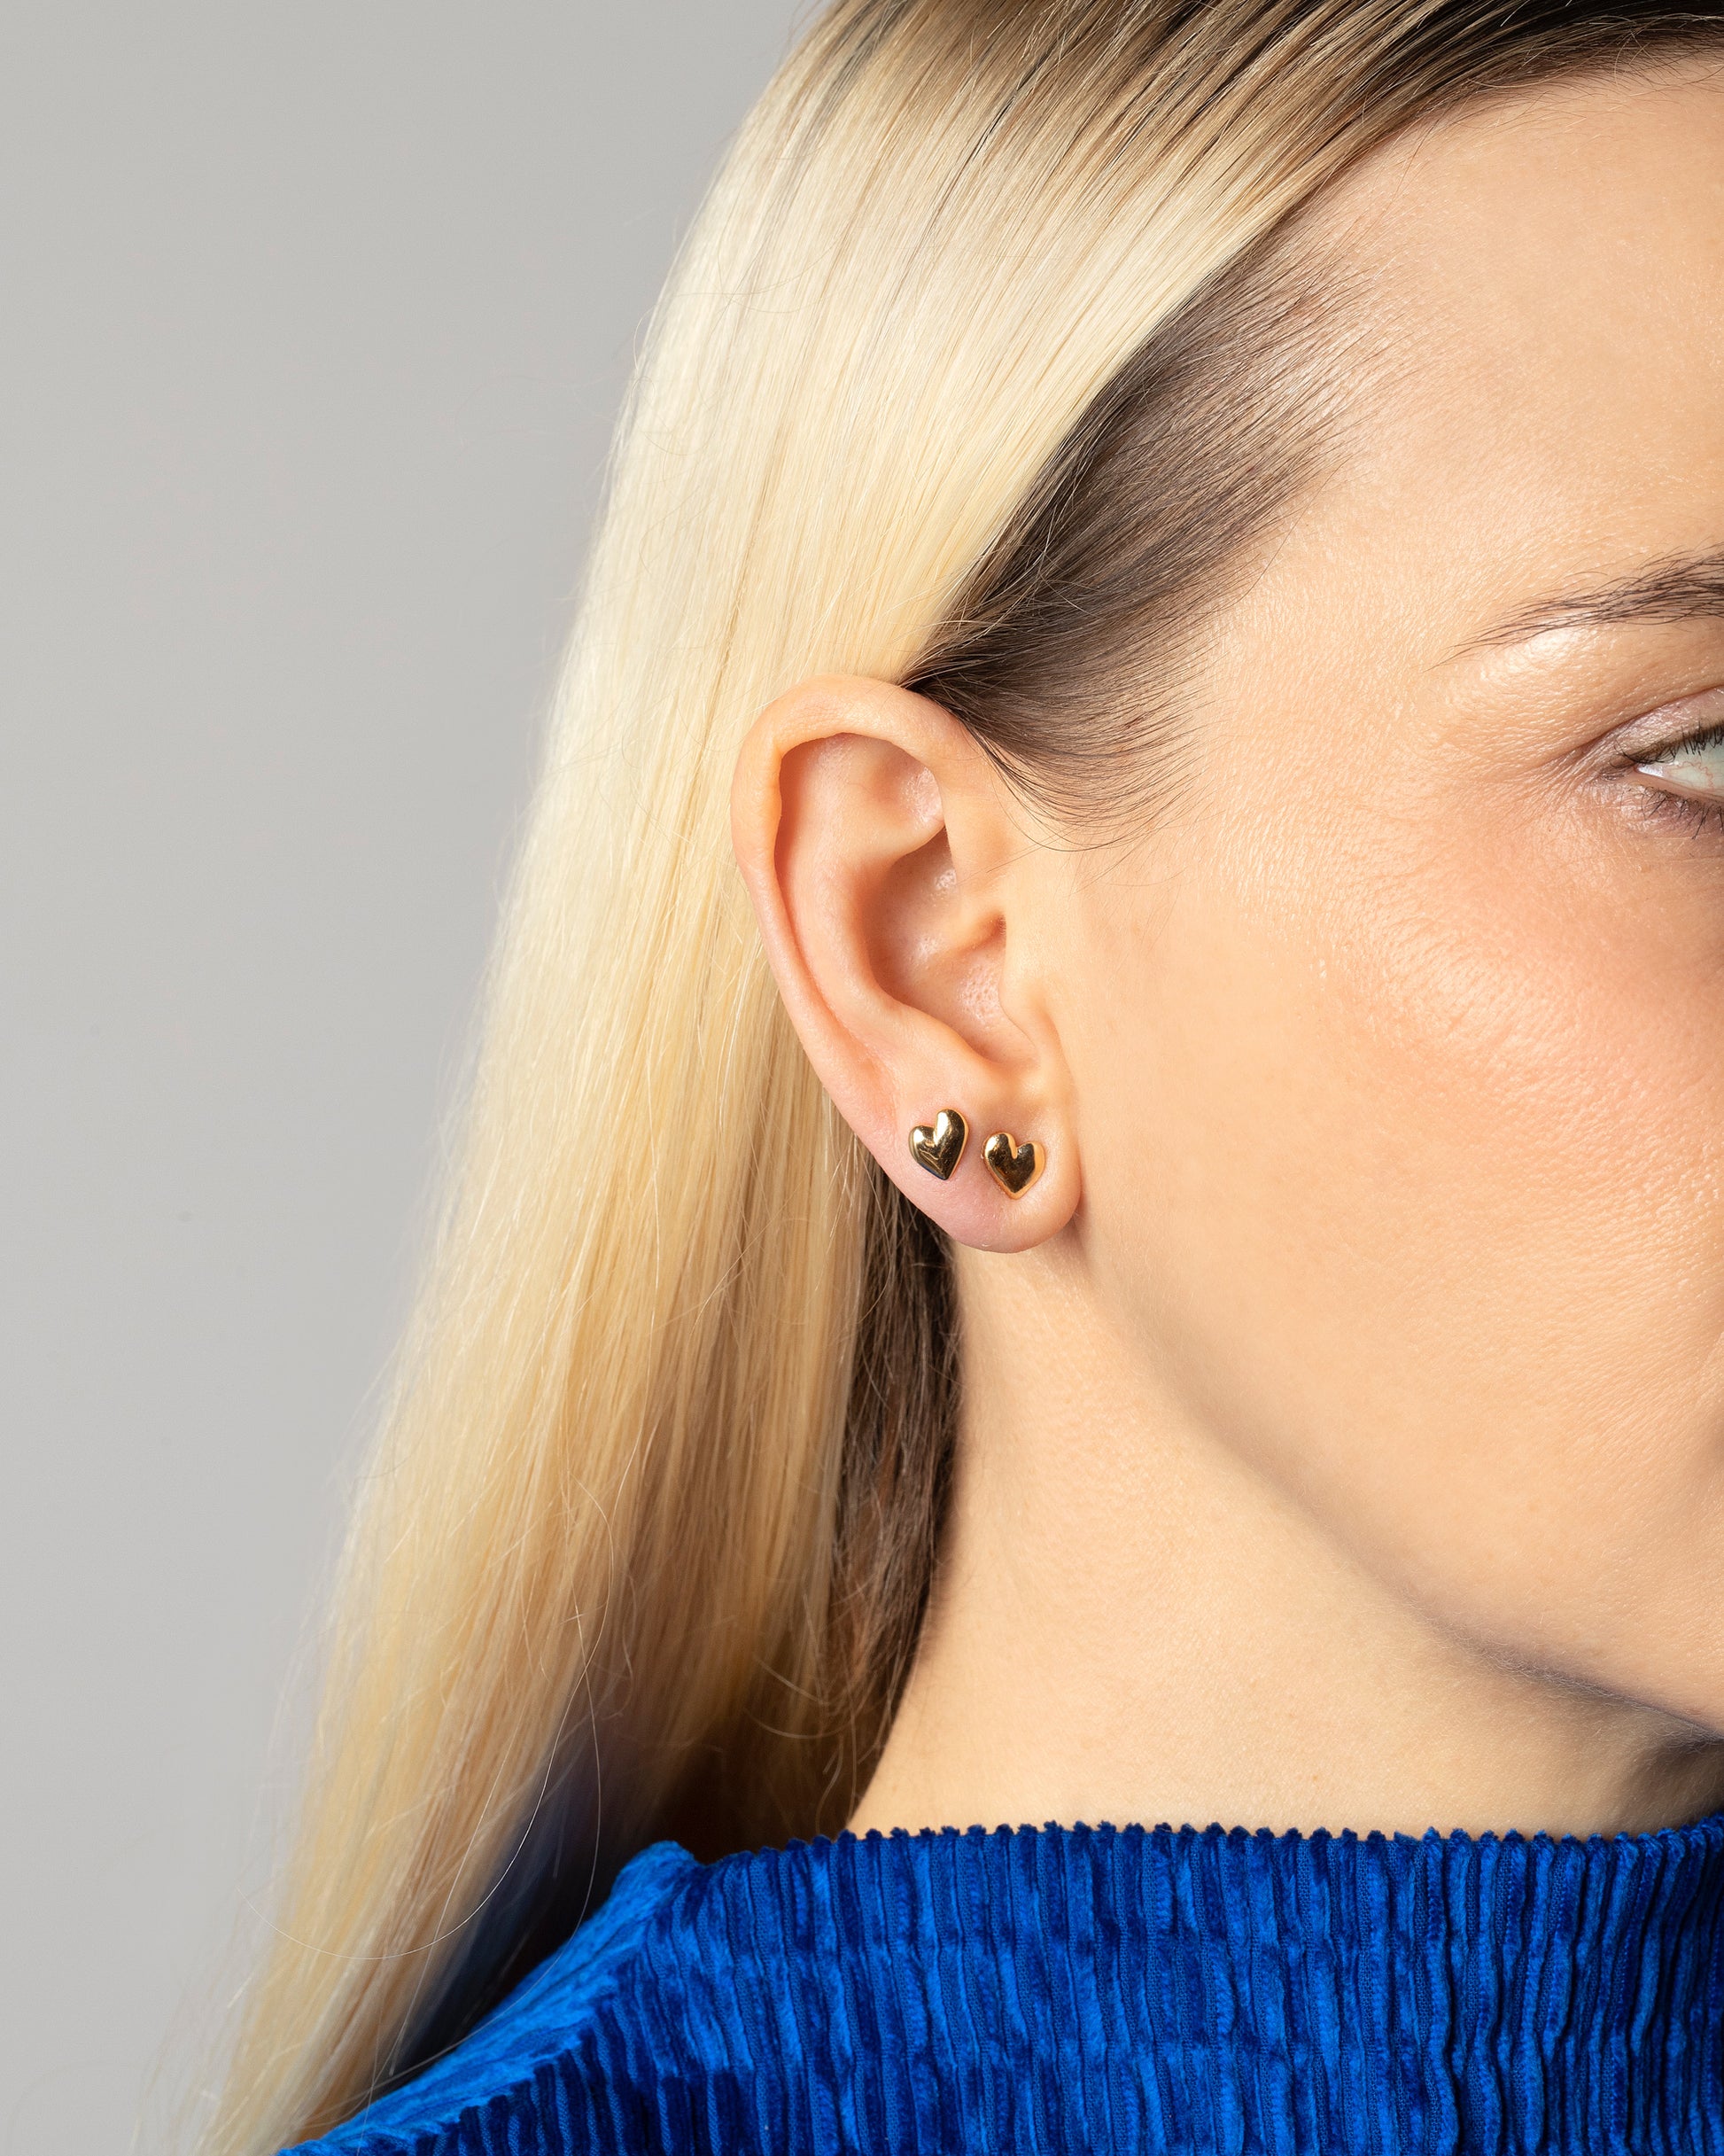 Editorial photo of model wearing the Thousand & One Night Heart Stud Earrings - Small.